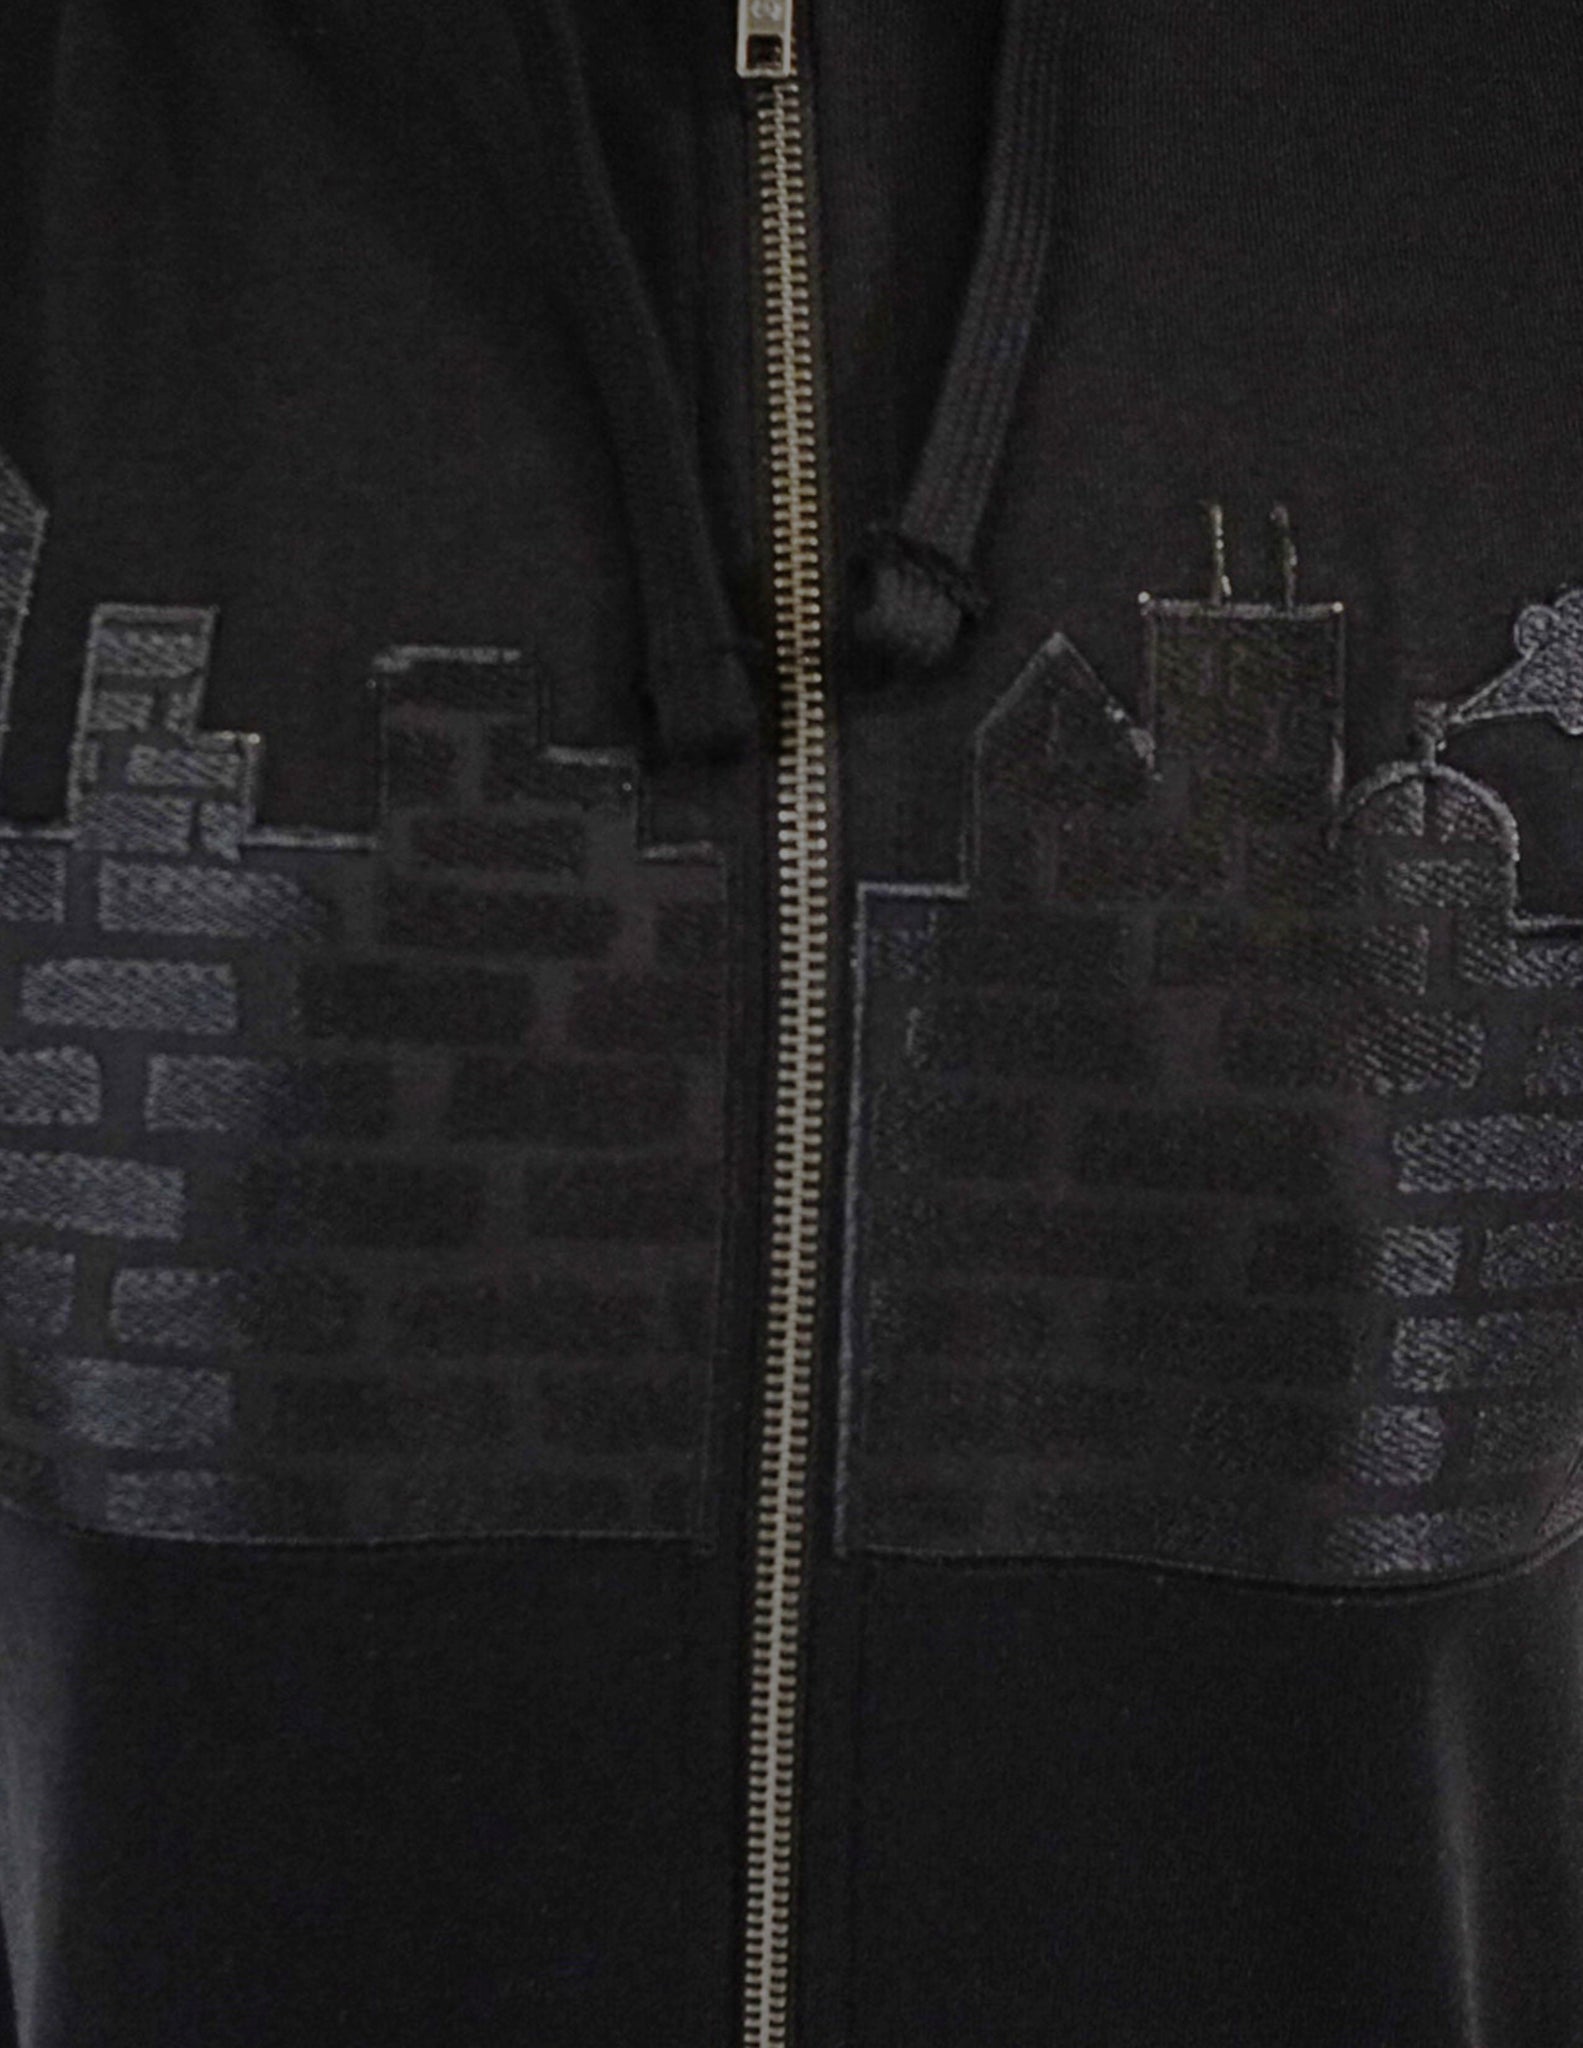 One Brick At A Time Hoodie DESIGNED BY THE STREETS